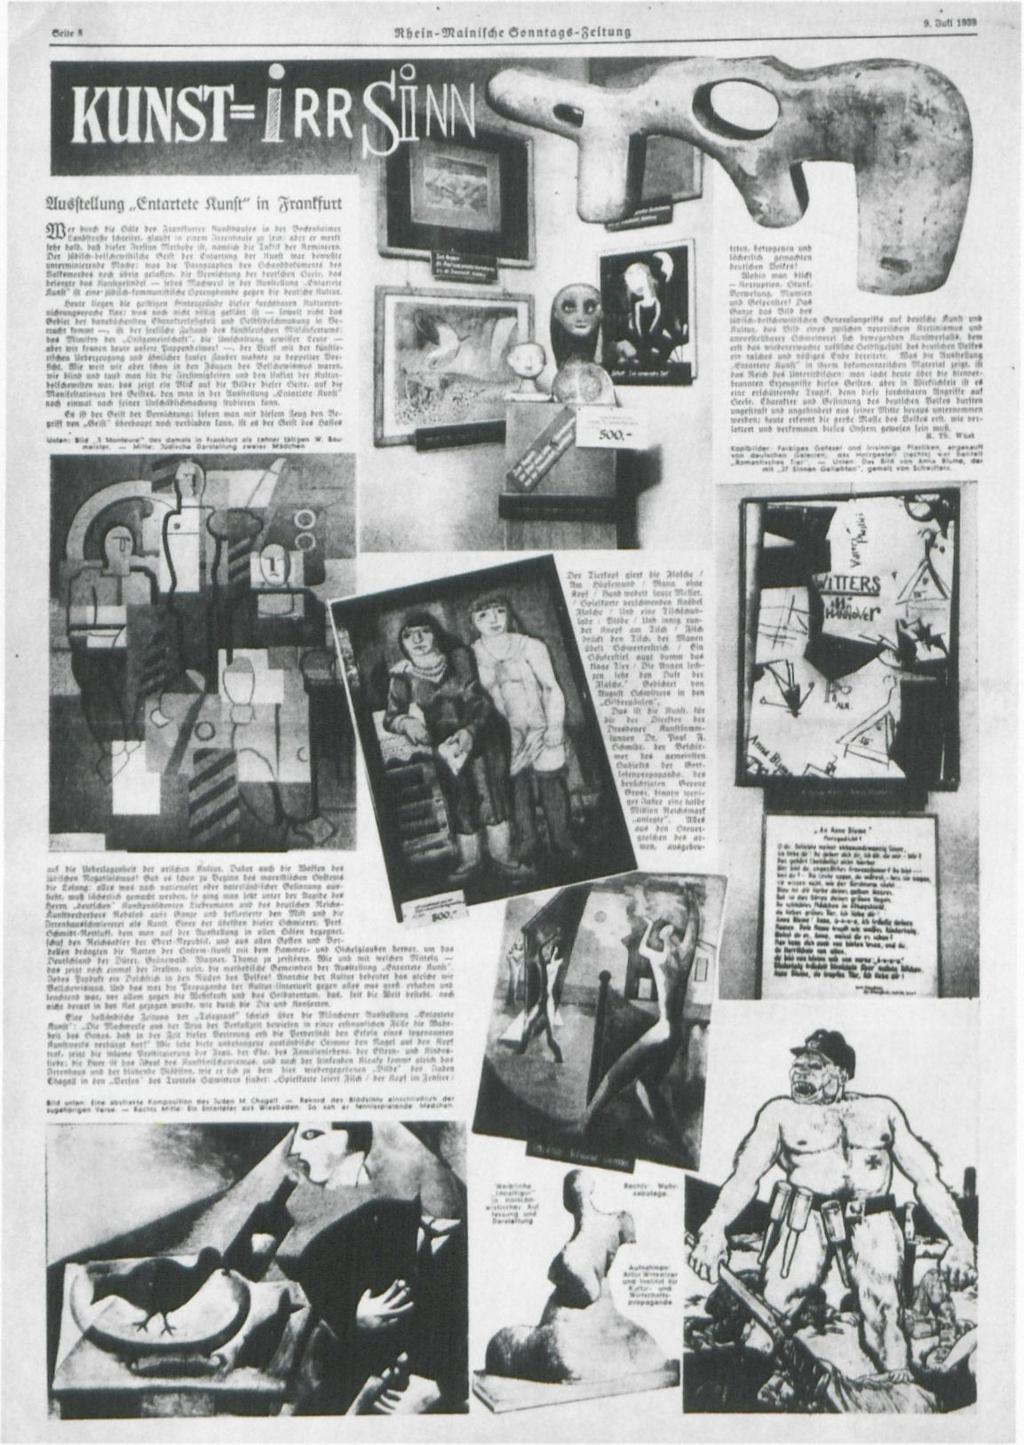 Sonntaps-Zeitung, July 9, 1939, identifiable work is by Adler, Baumeister, Chagall,